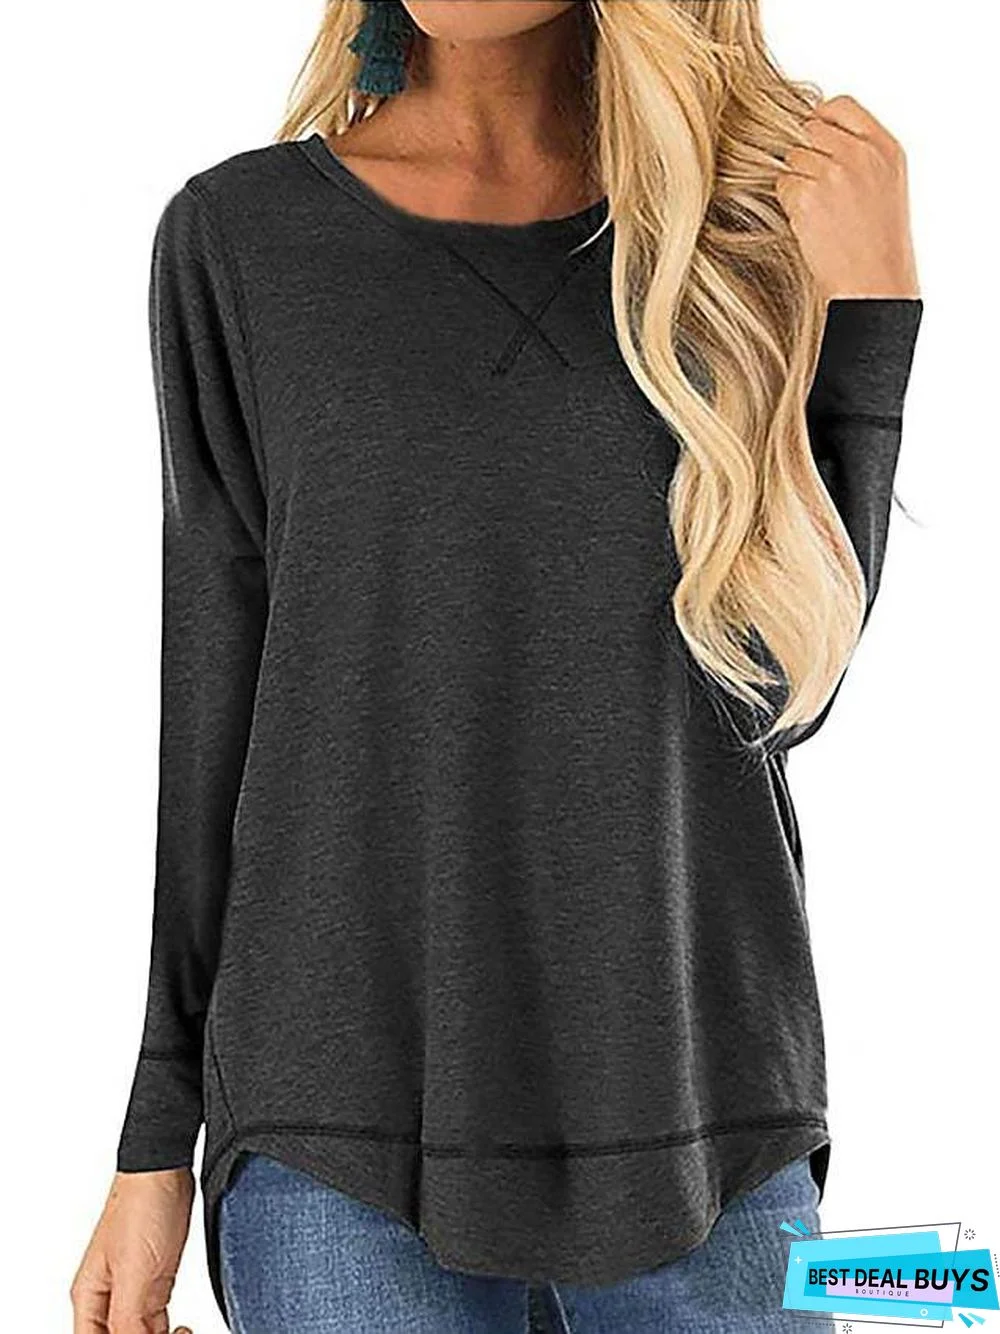 Women's T-Shirt Plain Solid Color Long Sleeve Round Neck Basic Casual Tops Cotton Black Green Sky Blue